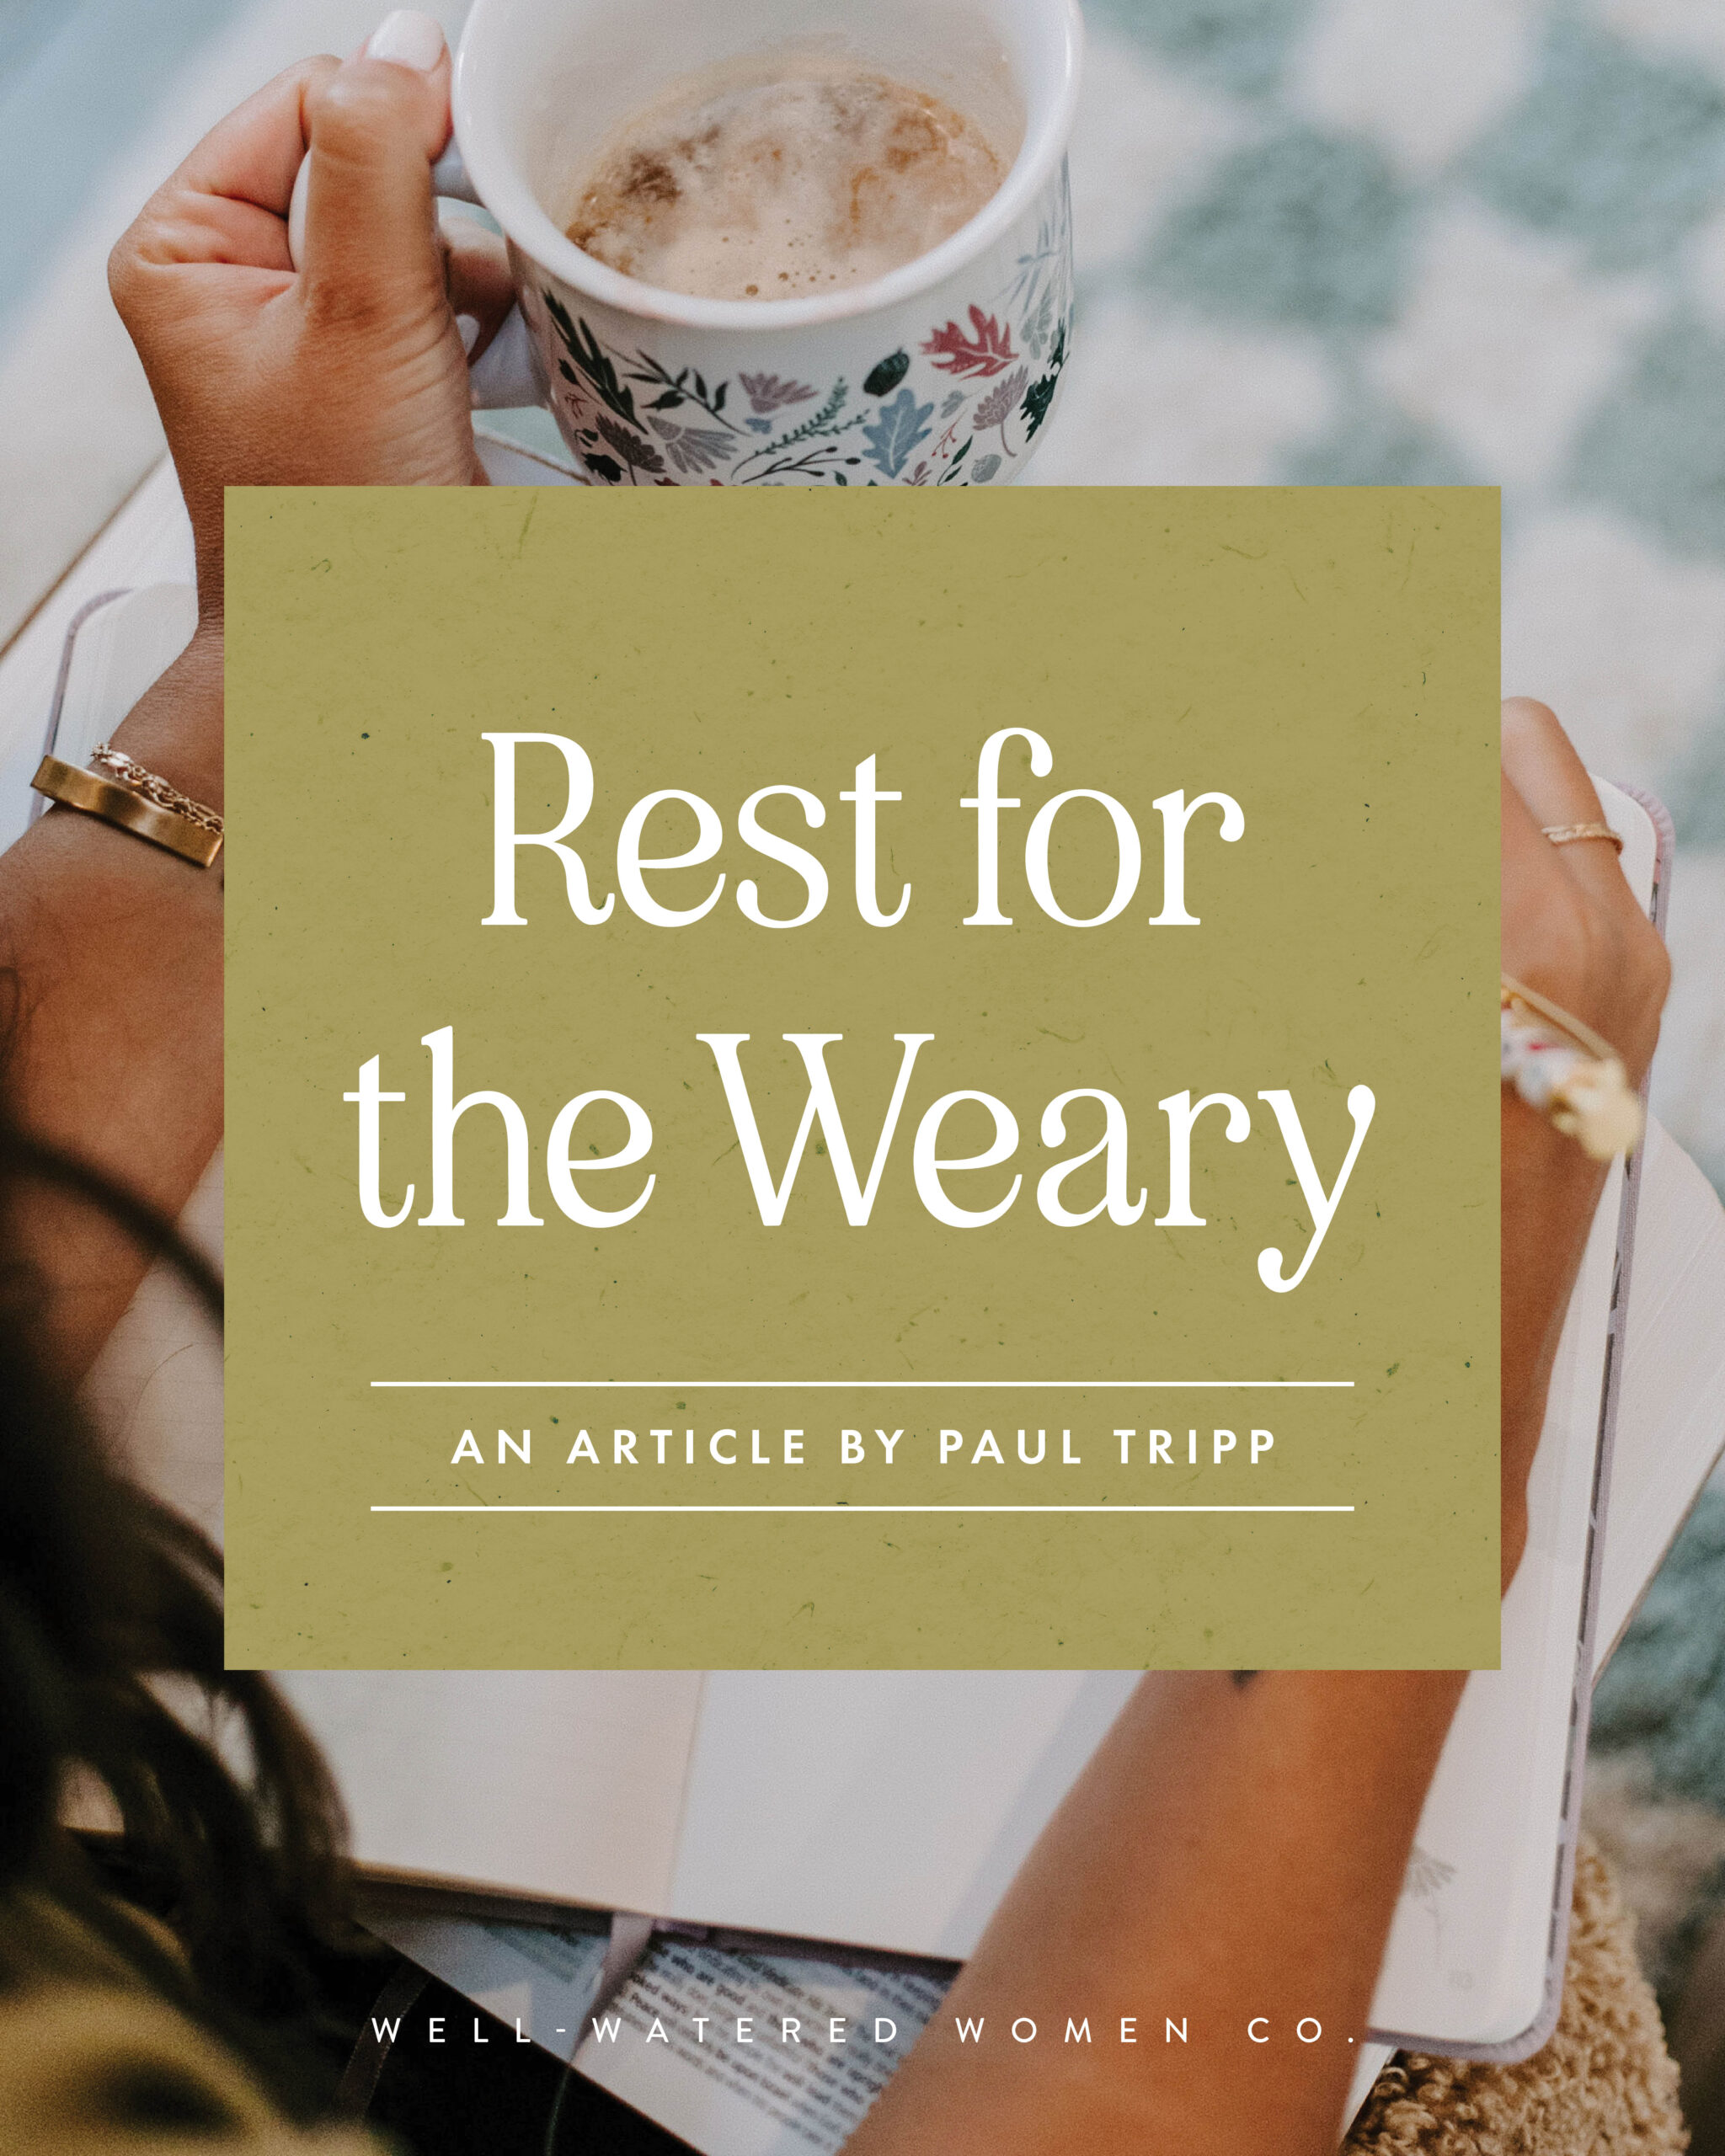 Rest for the Weary - an article from Well-Watered Women